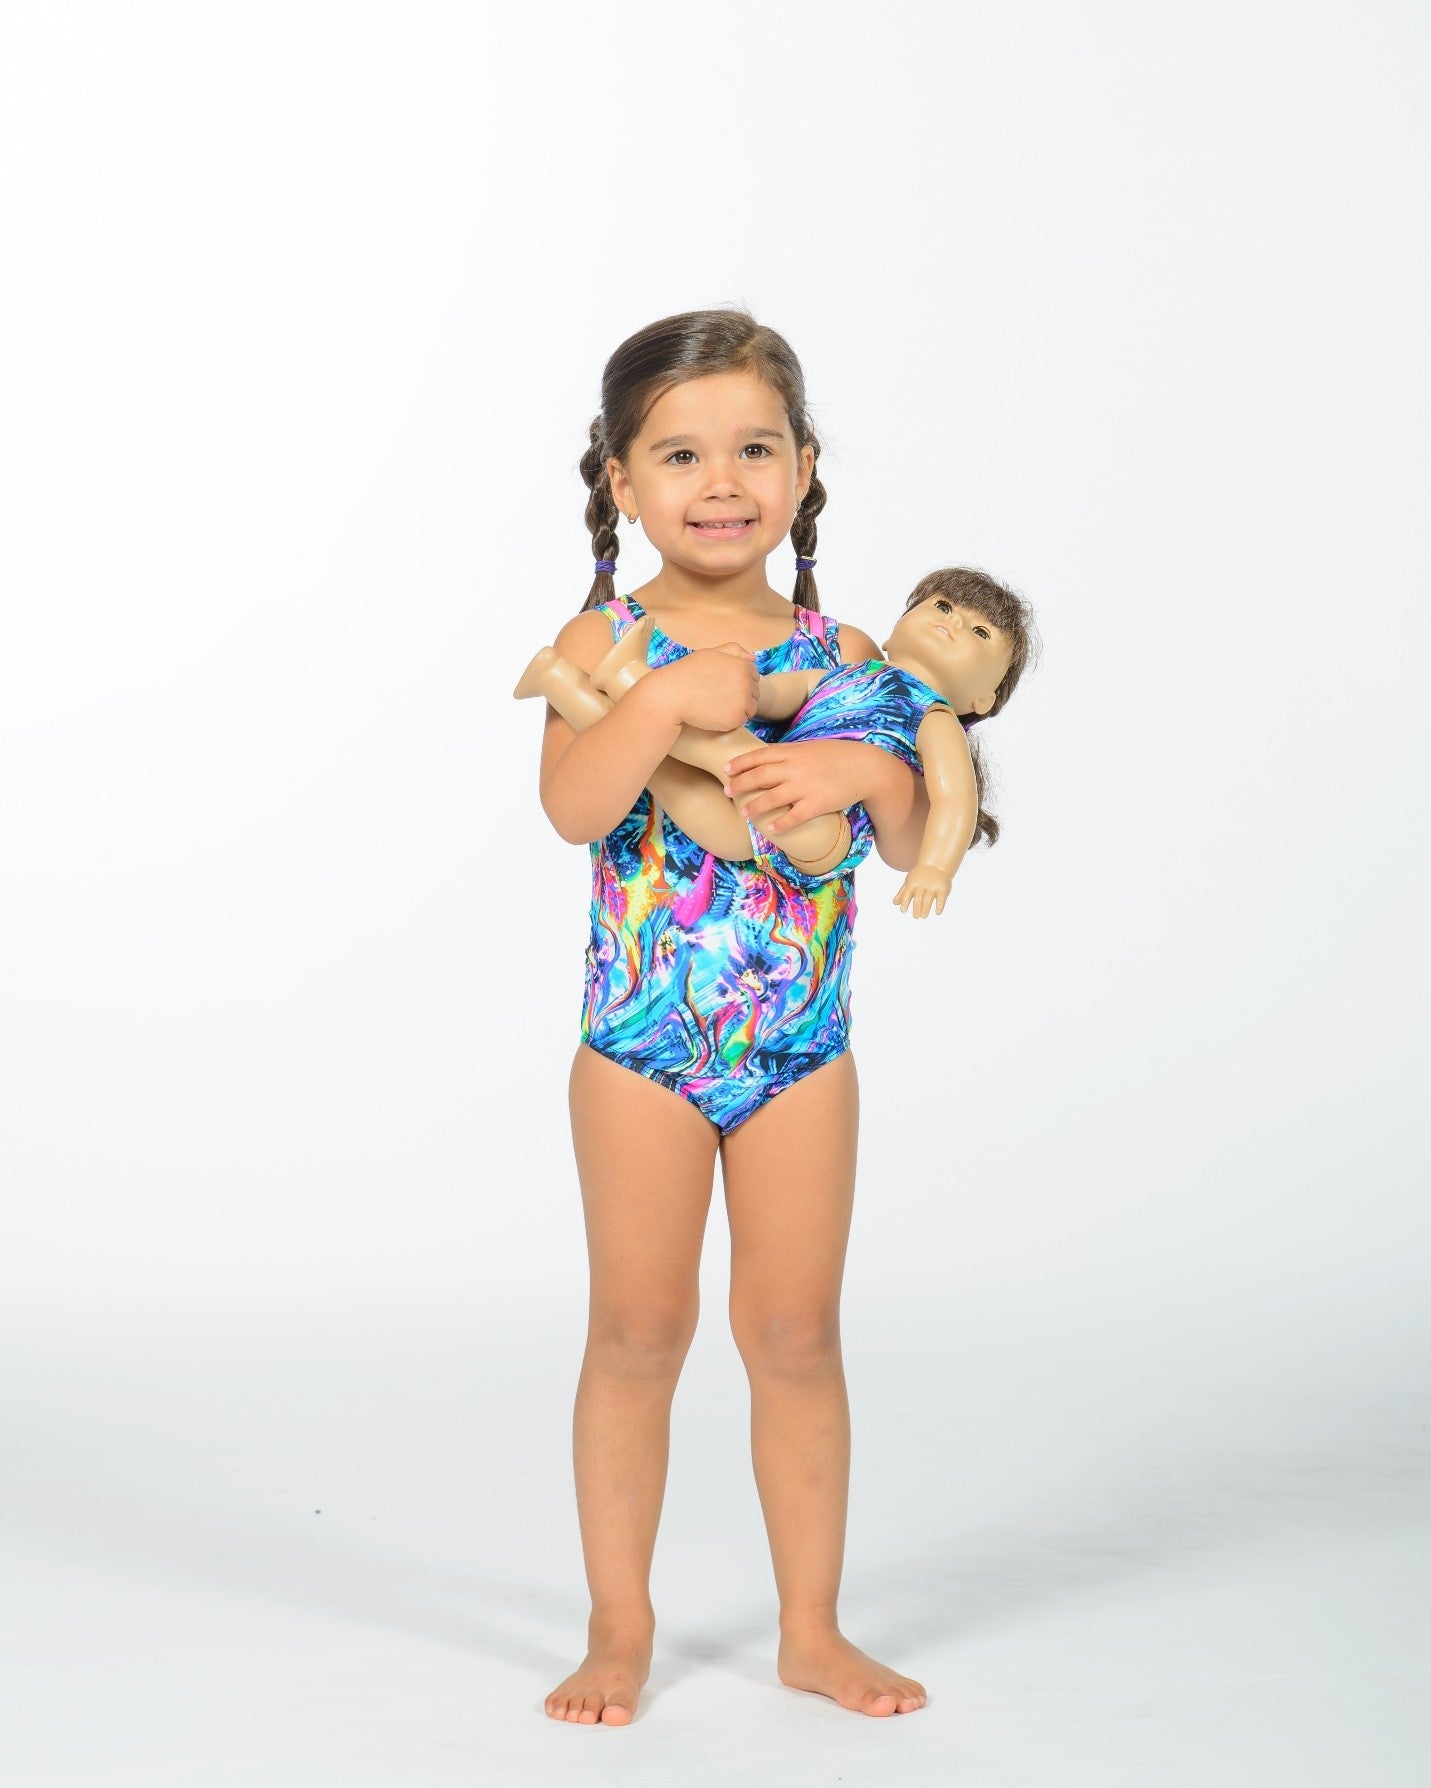 Where to Buy Gymnastics Leotards for Toddlers